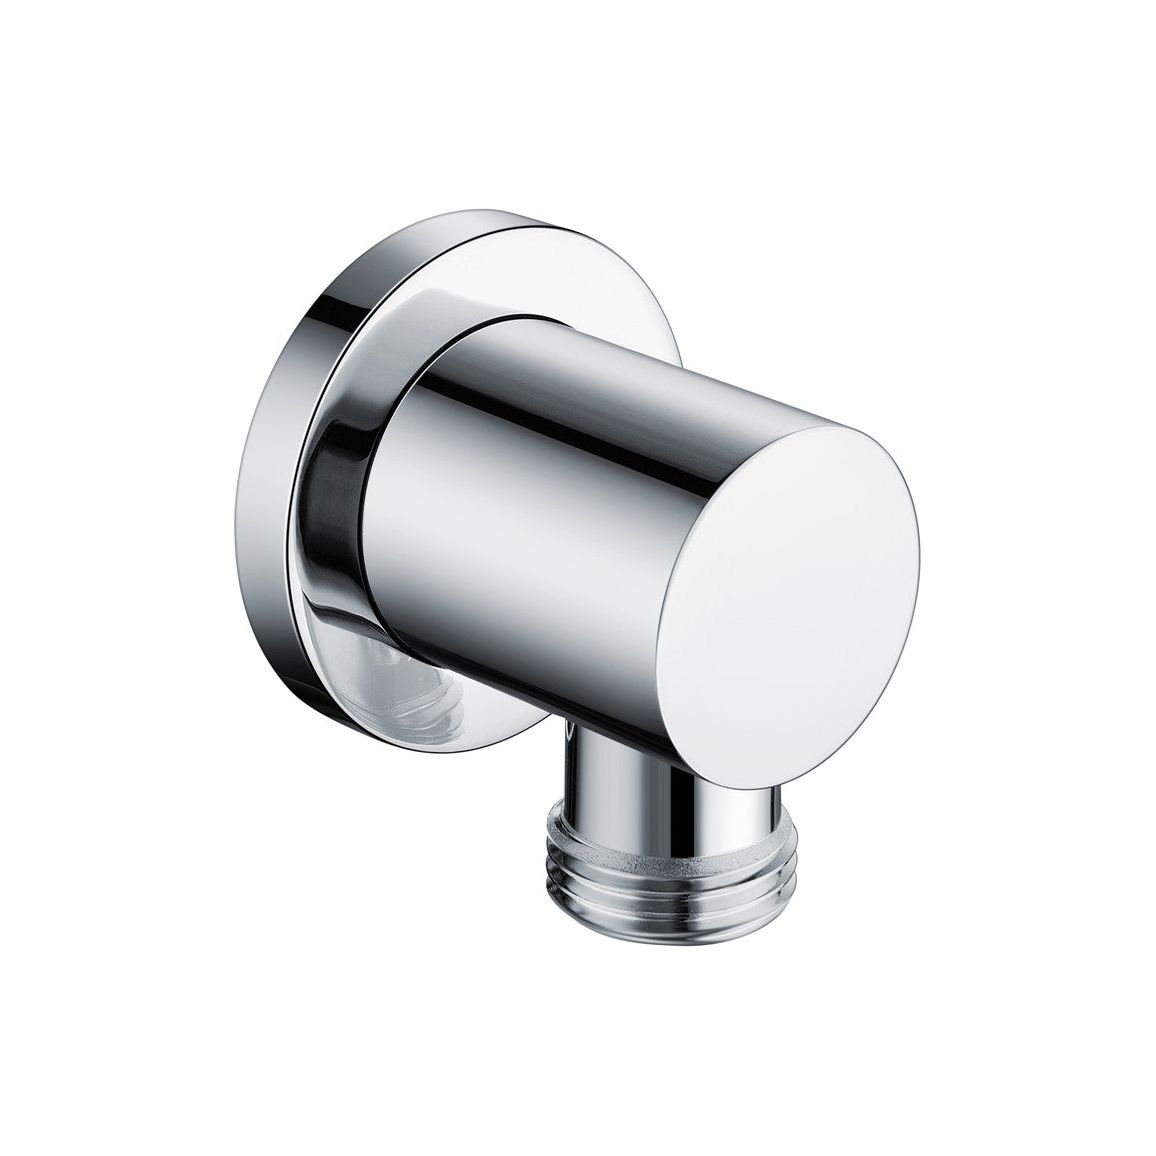 Round Wall Outlet Elbow - Chrome